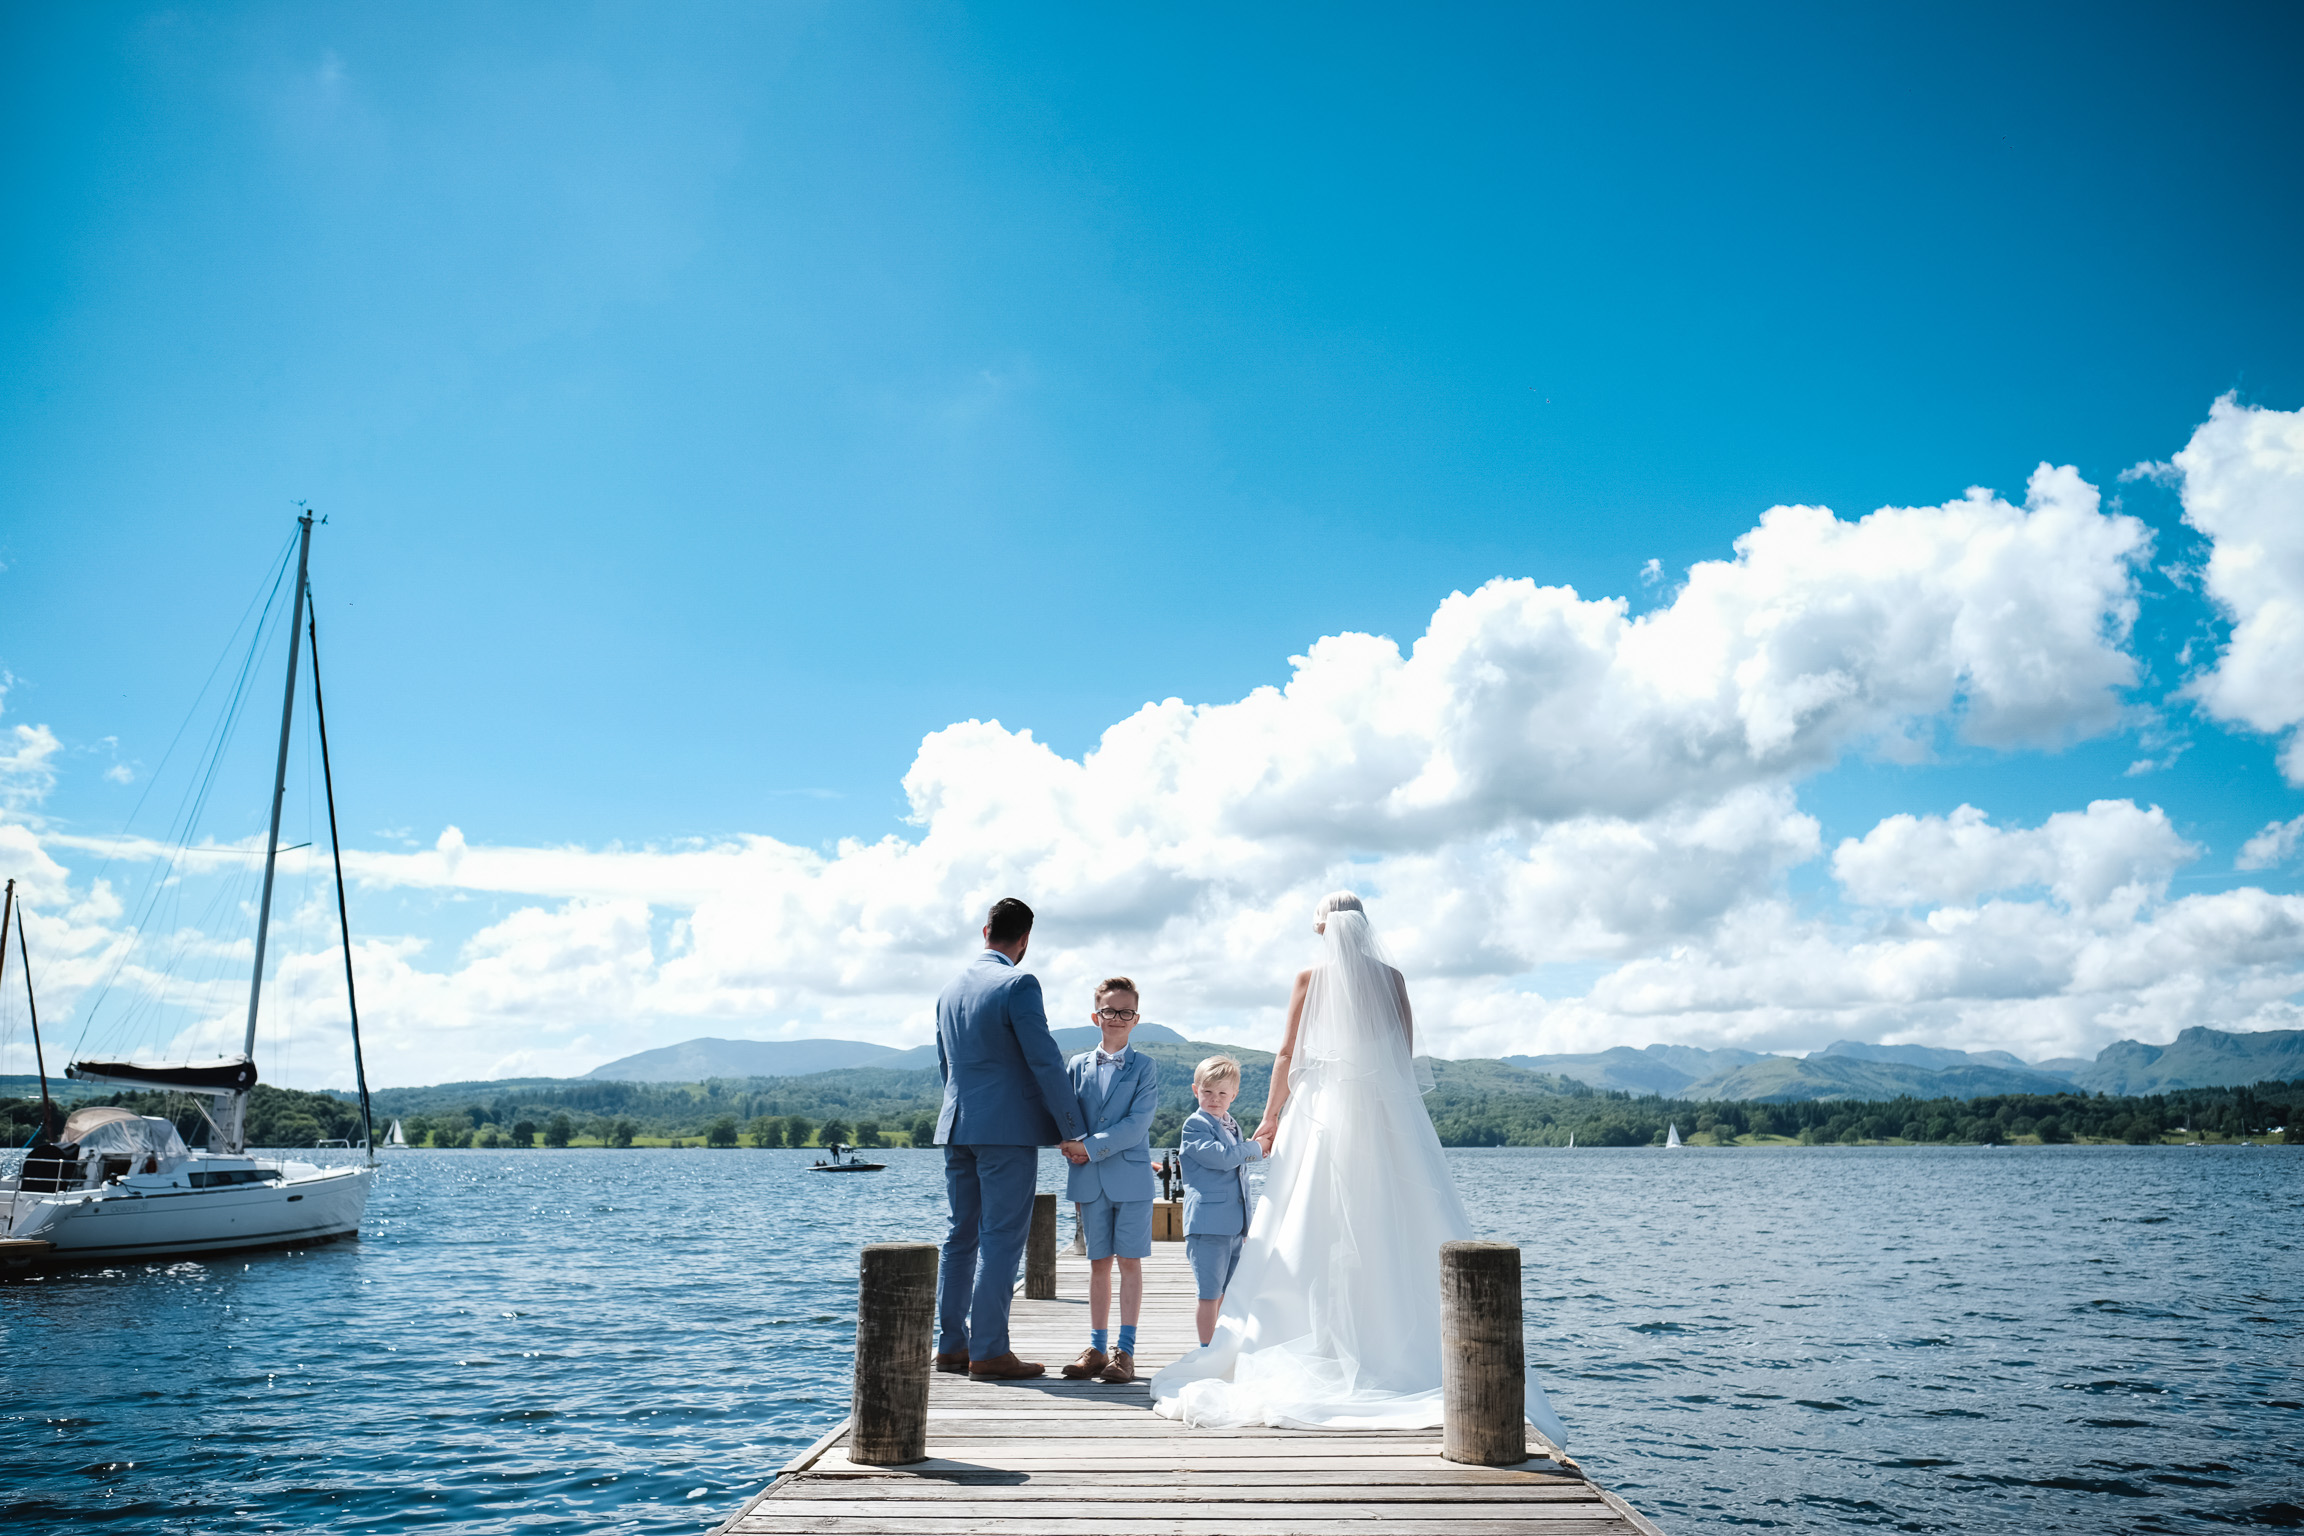 Low wood bay wedding photographer in widermere documentry wedding photography north west cumbria (60 of 131).jpg